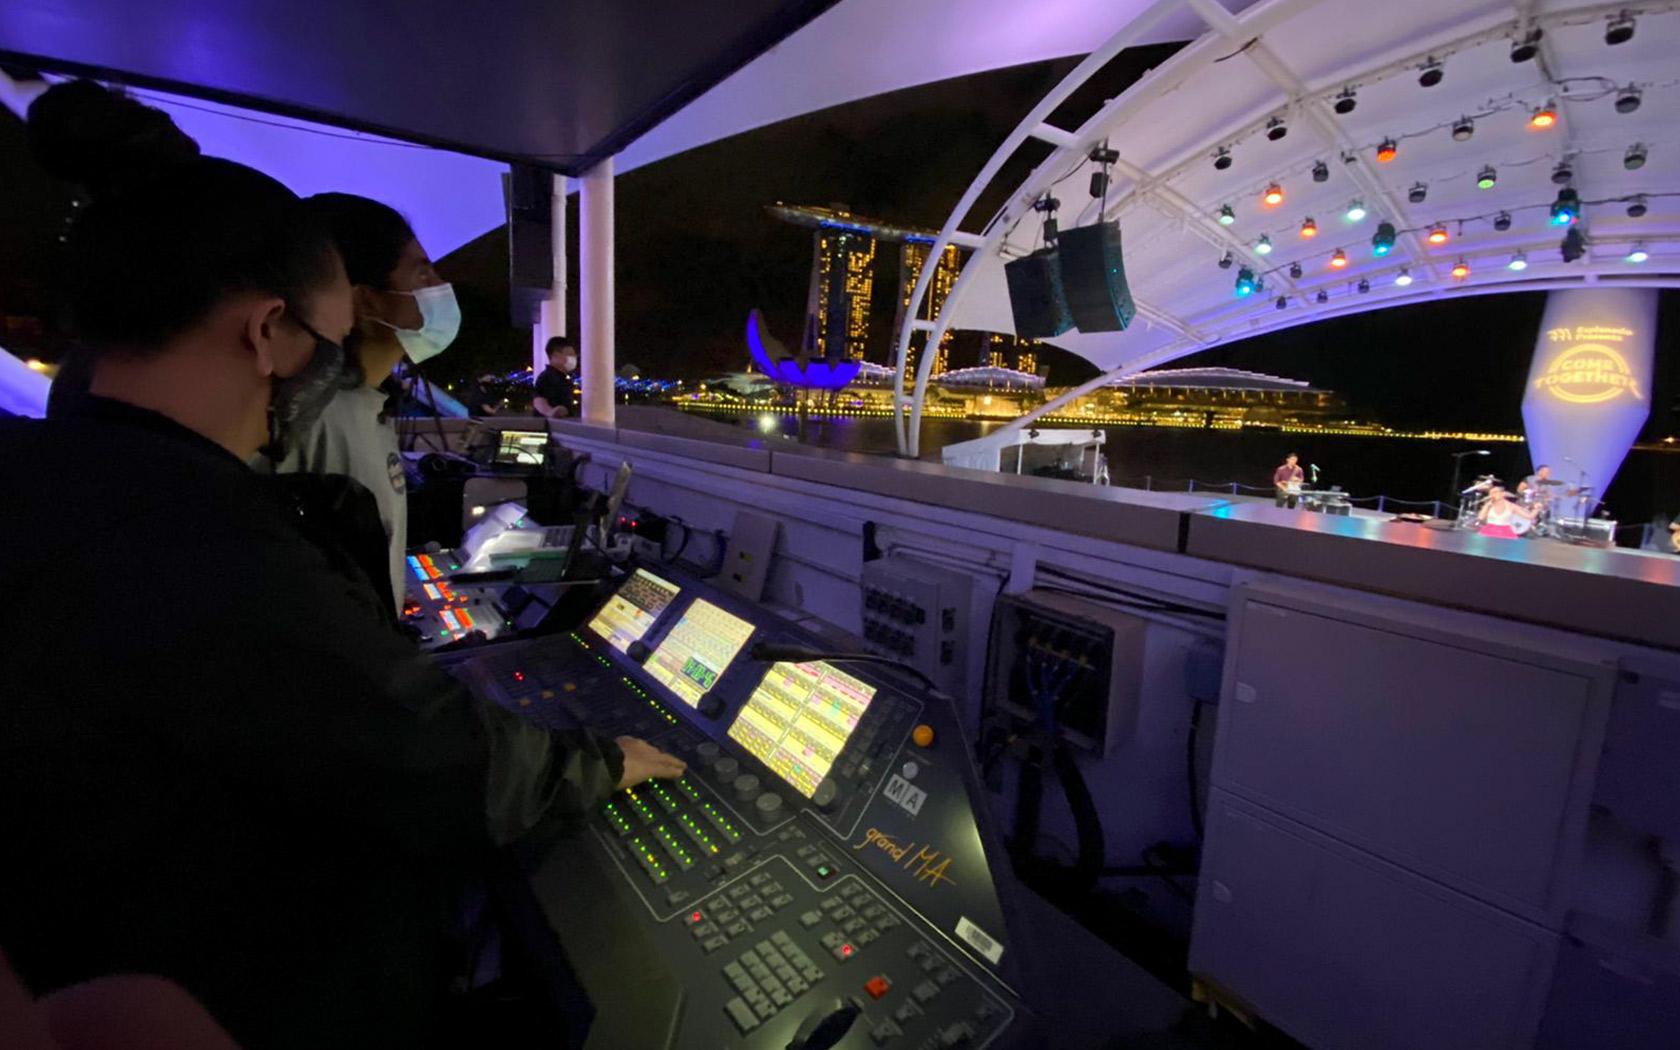 An image of a lady operating the lighting controls at Esplanade Outdoor Theatre.